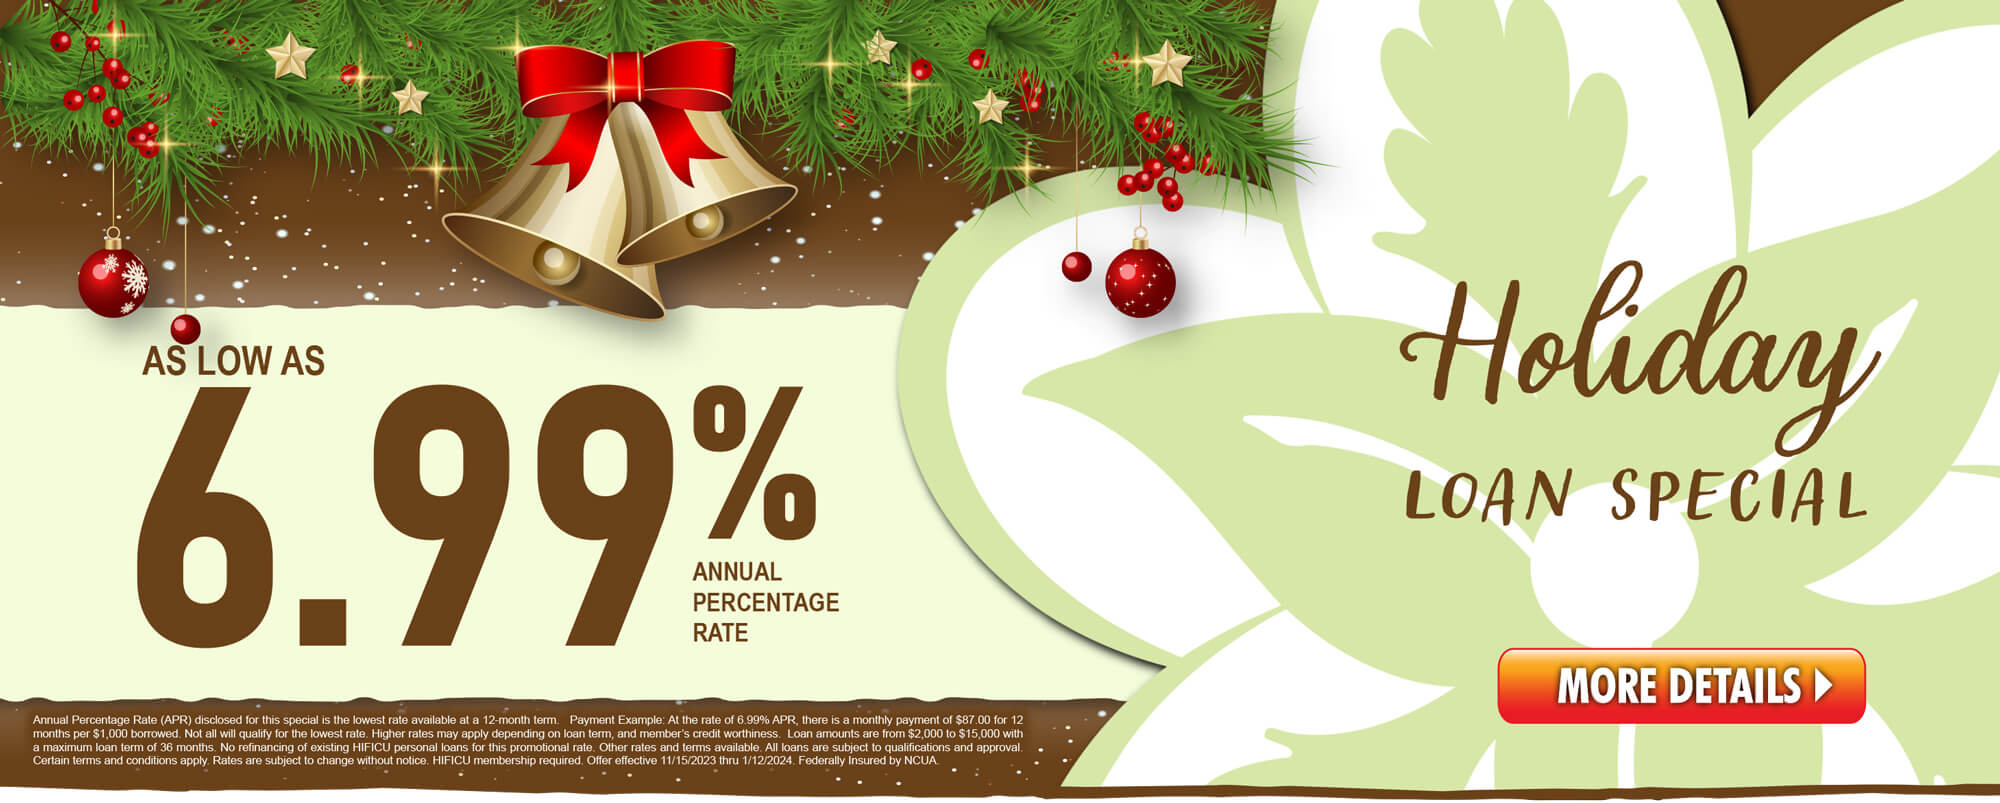 Holiday Loan Special - As low as 6.99%APR.  Apply today!